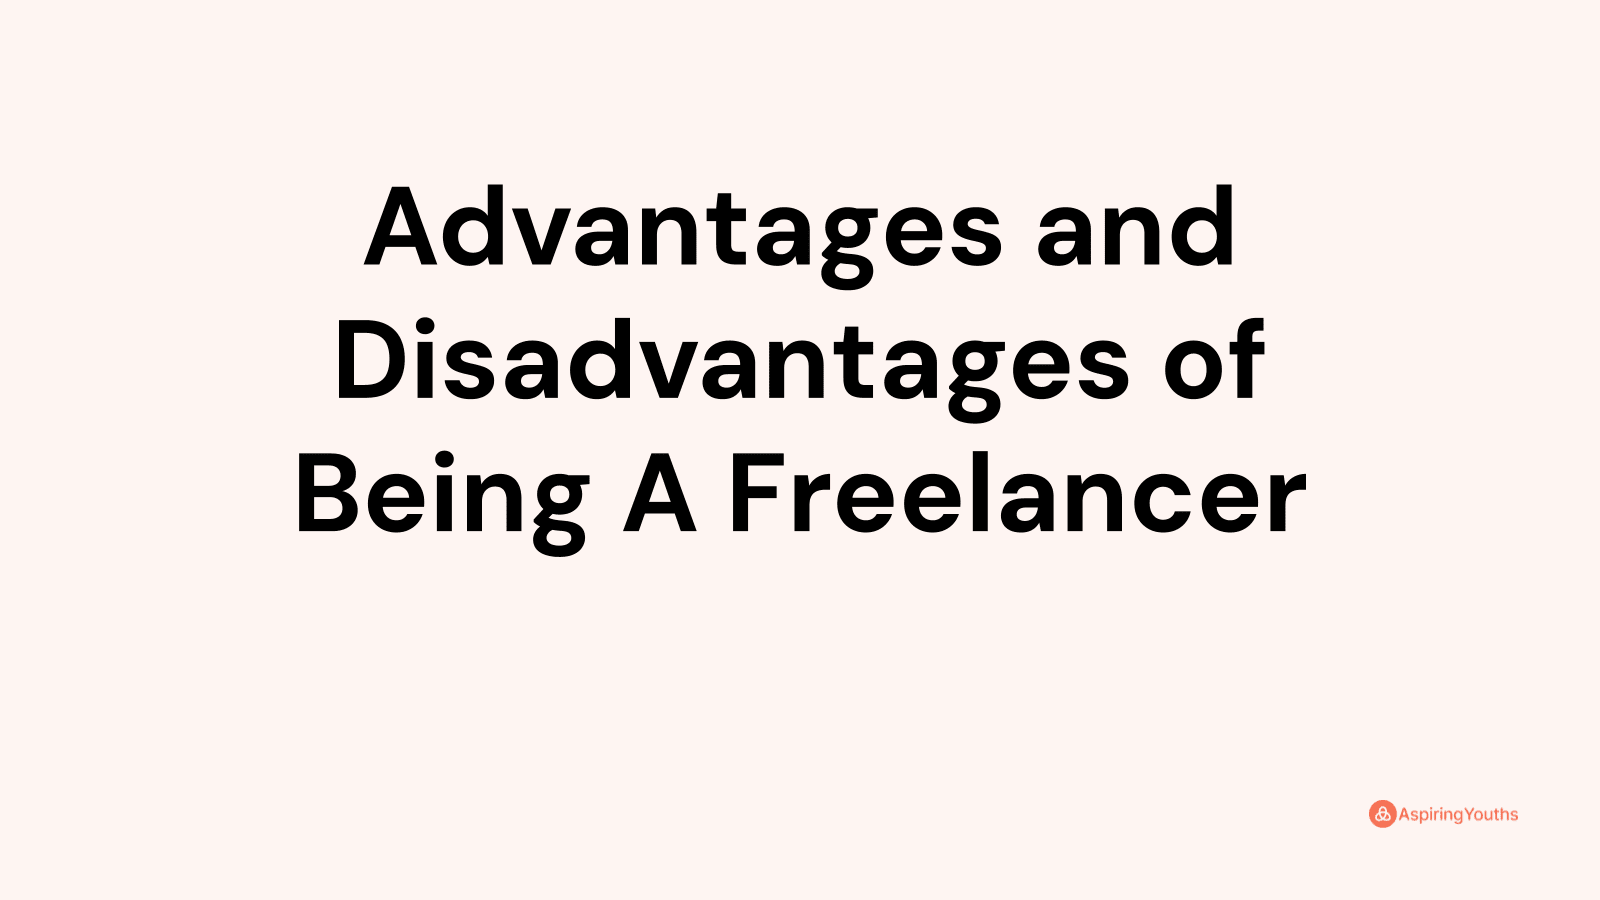 Advantages and disadvantages of Being A Freelancer